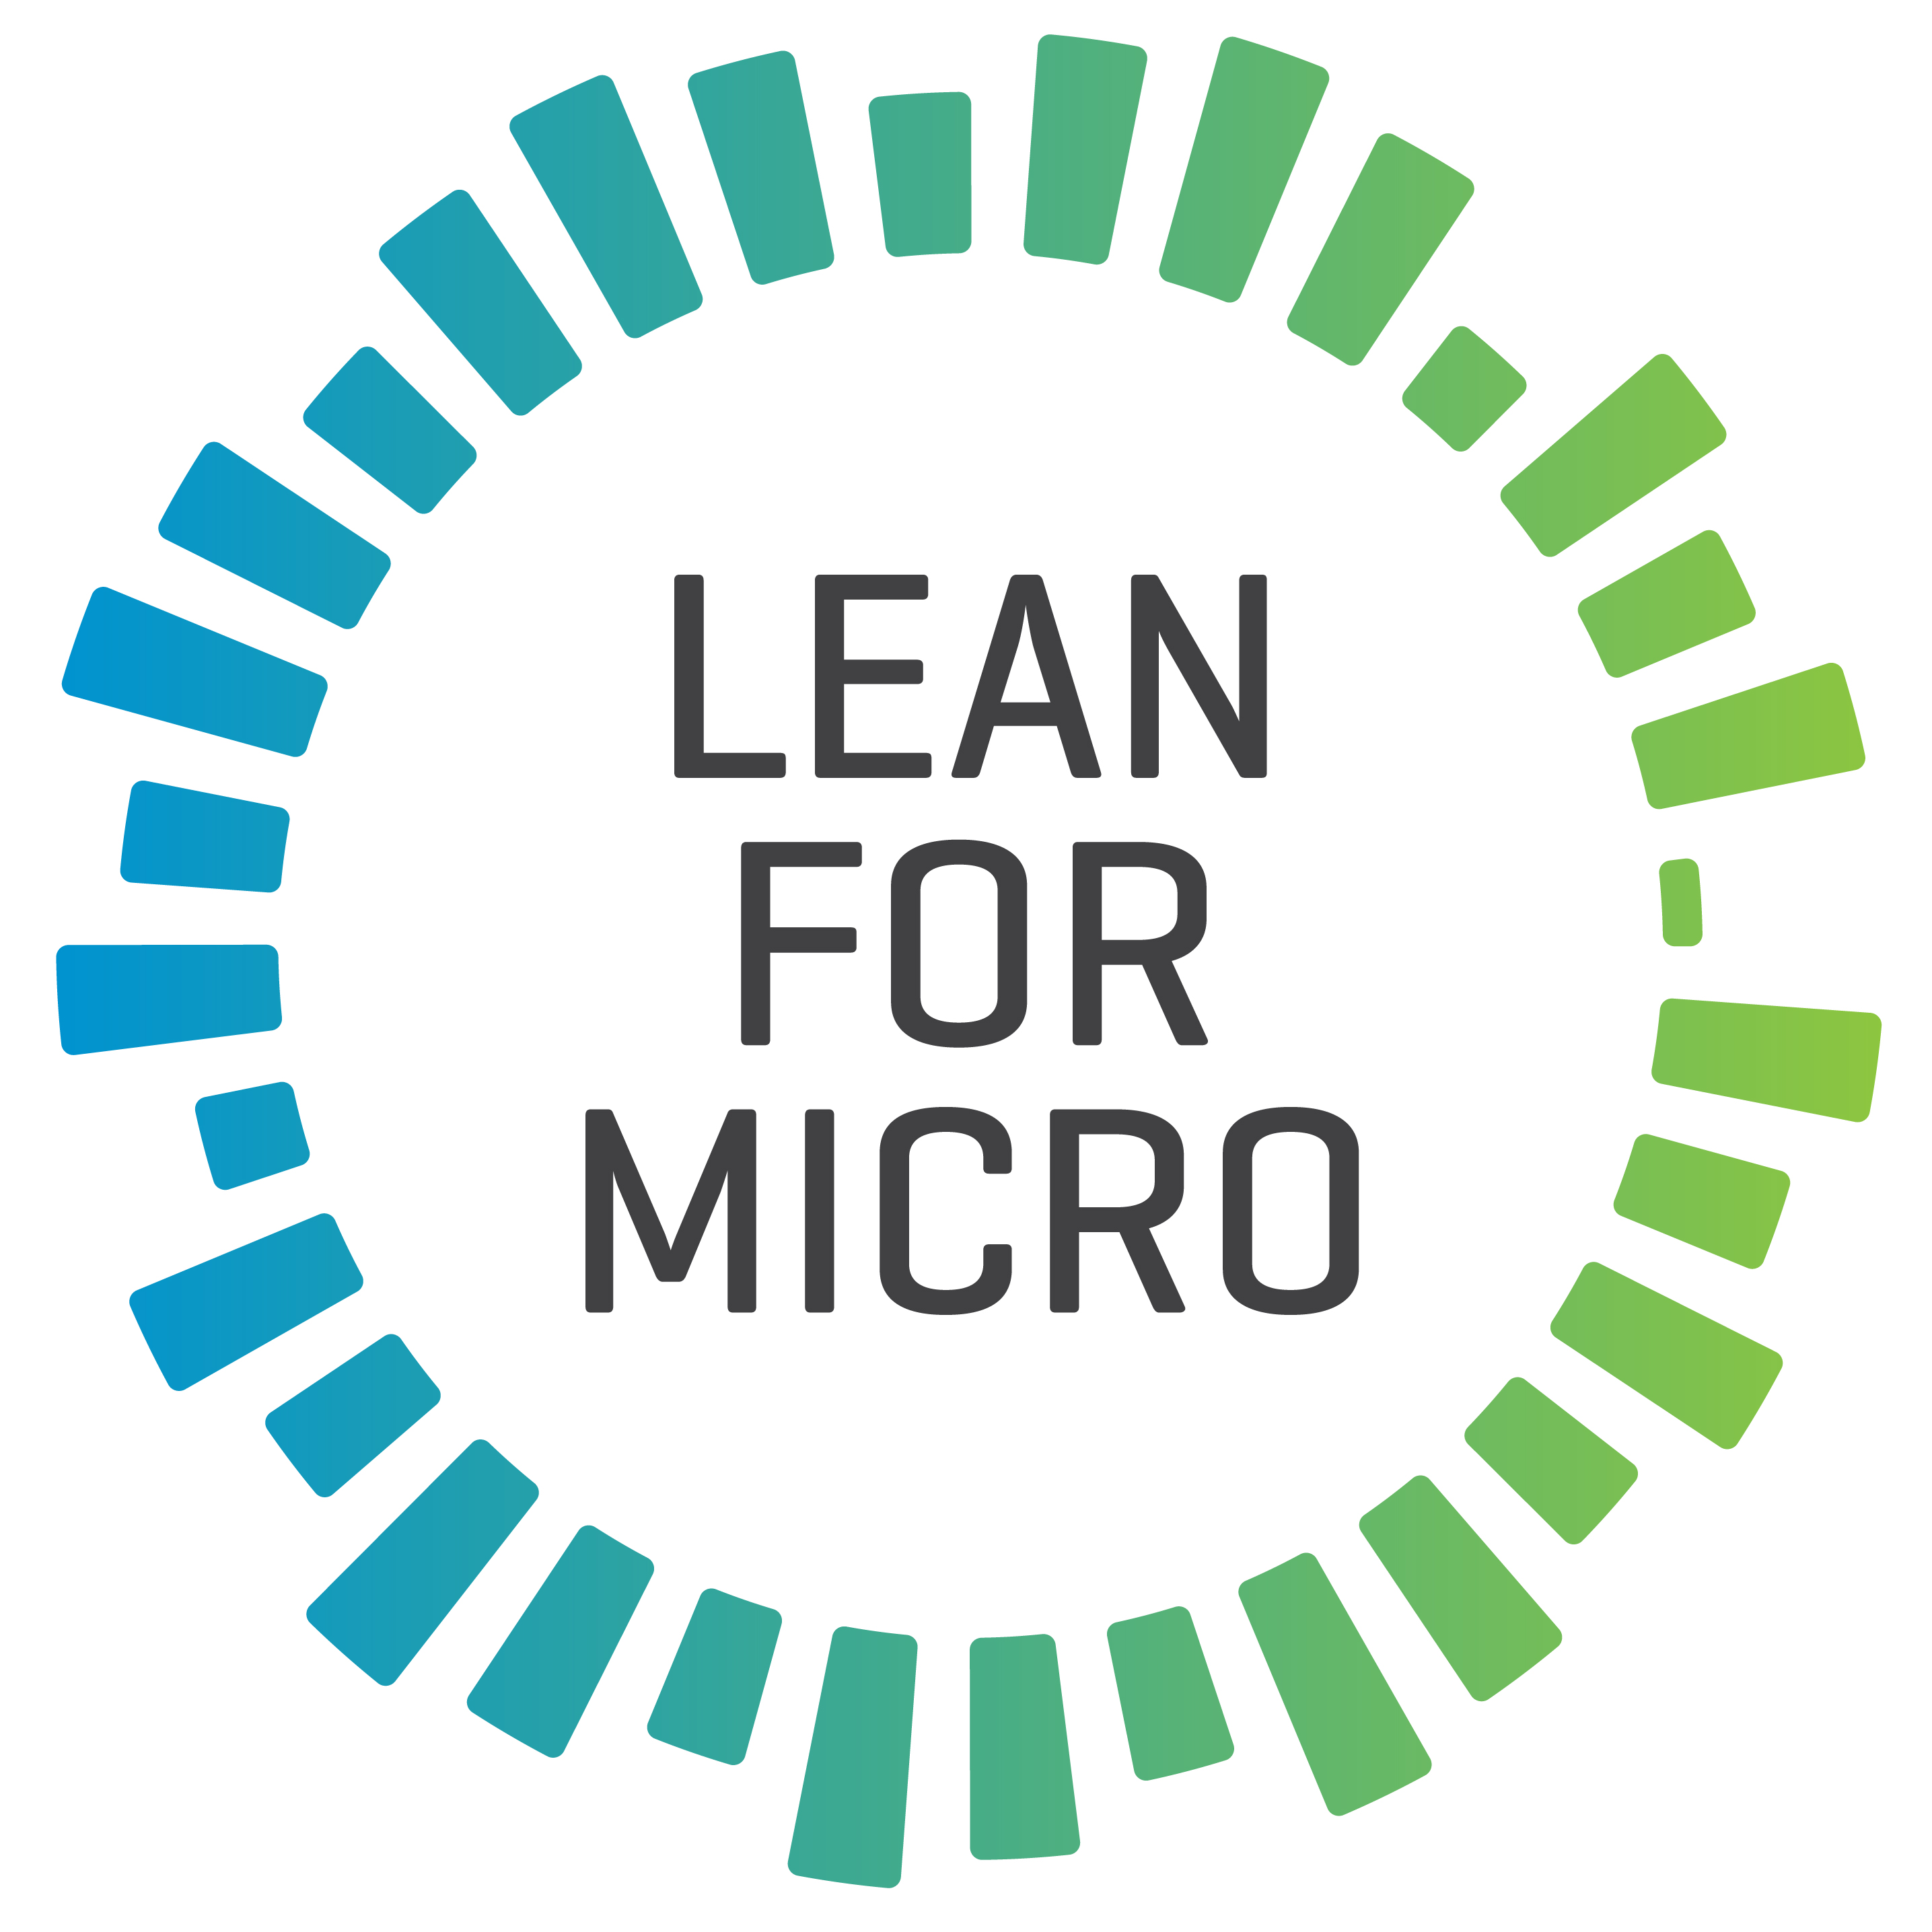 LEAN Supports for small business, including grants, funding, loans, mentoring